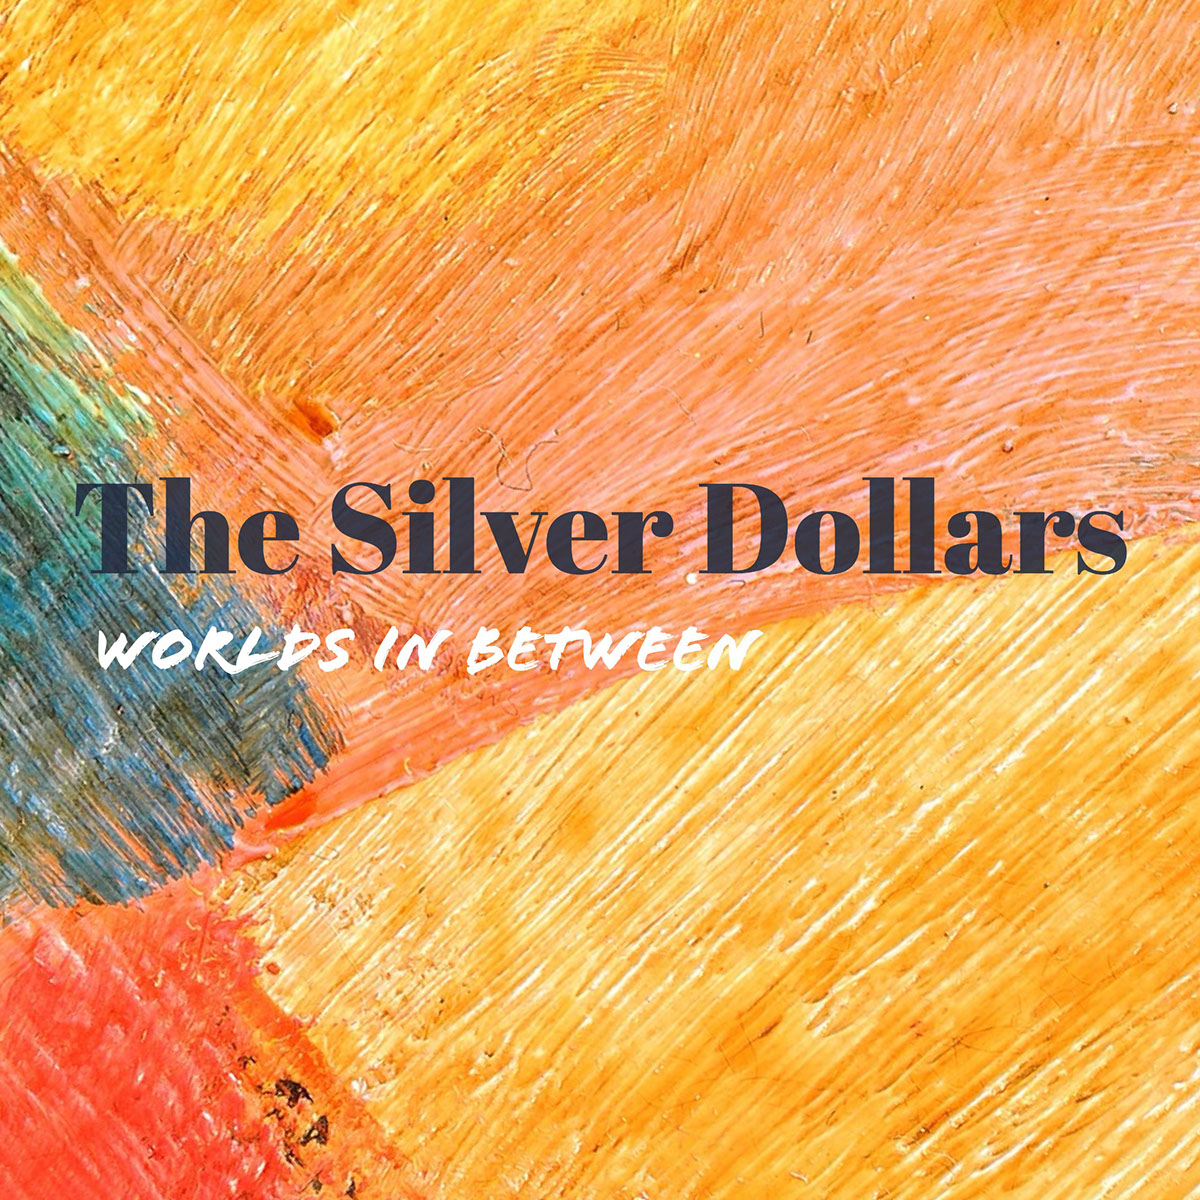 The Silver Dollars